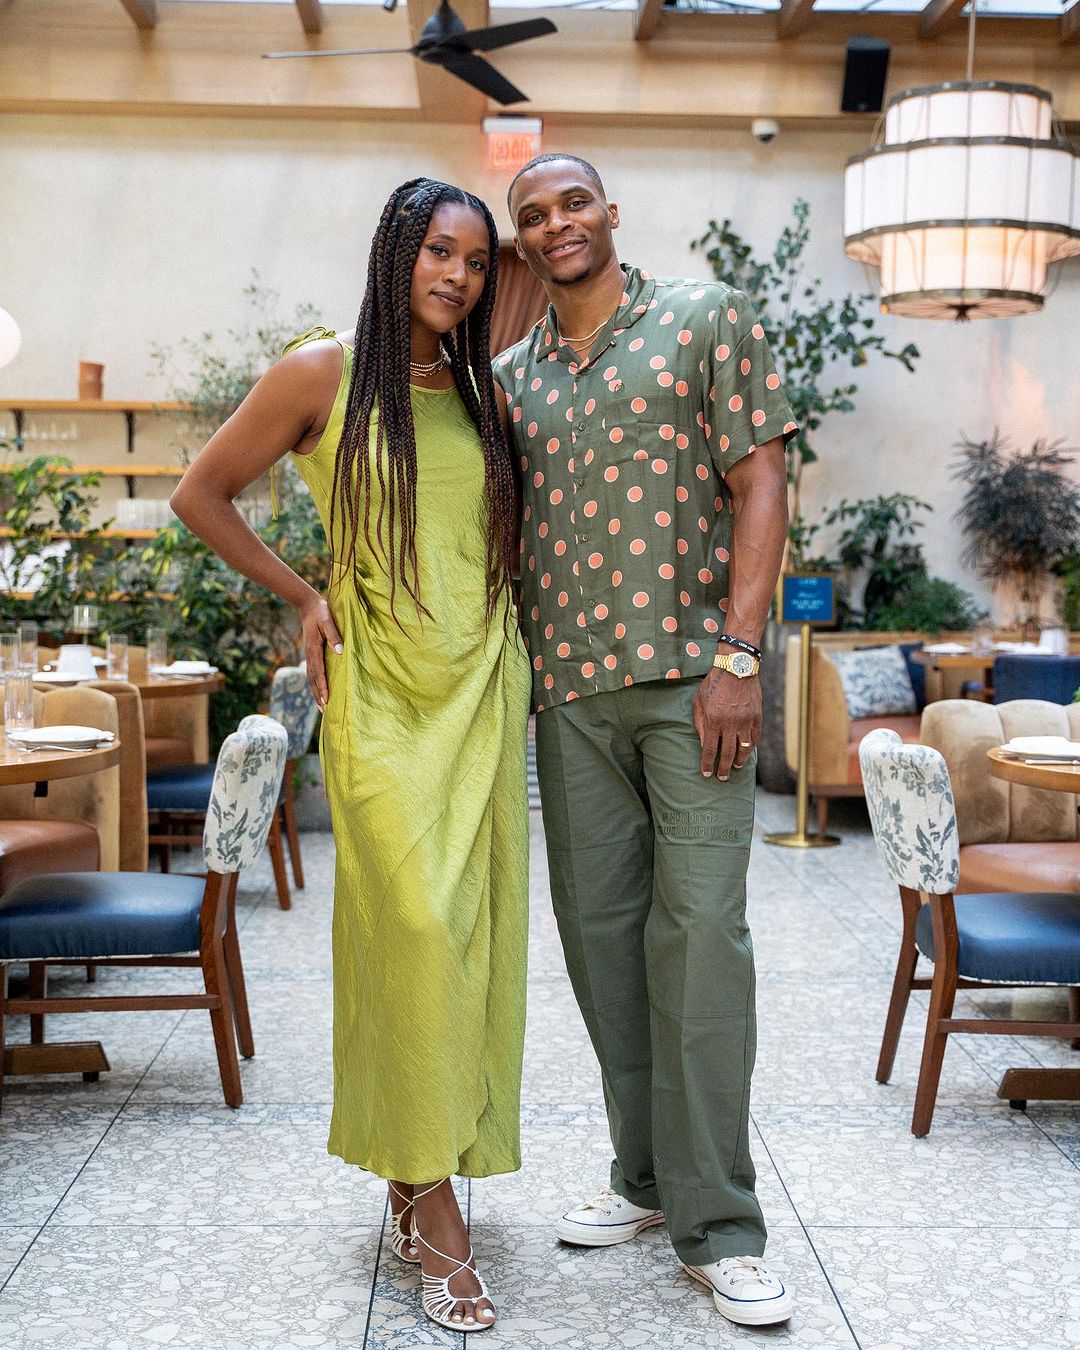 Russell Westbrook With His Wife Nina